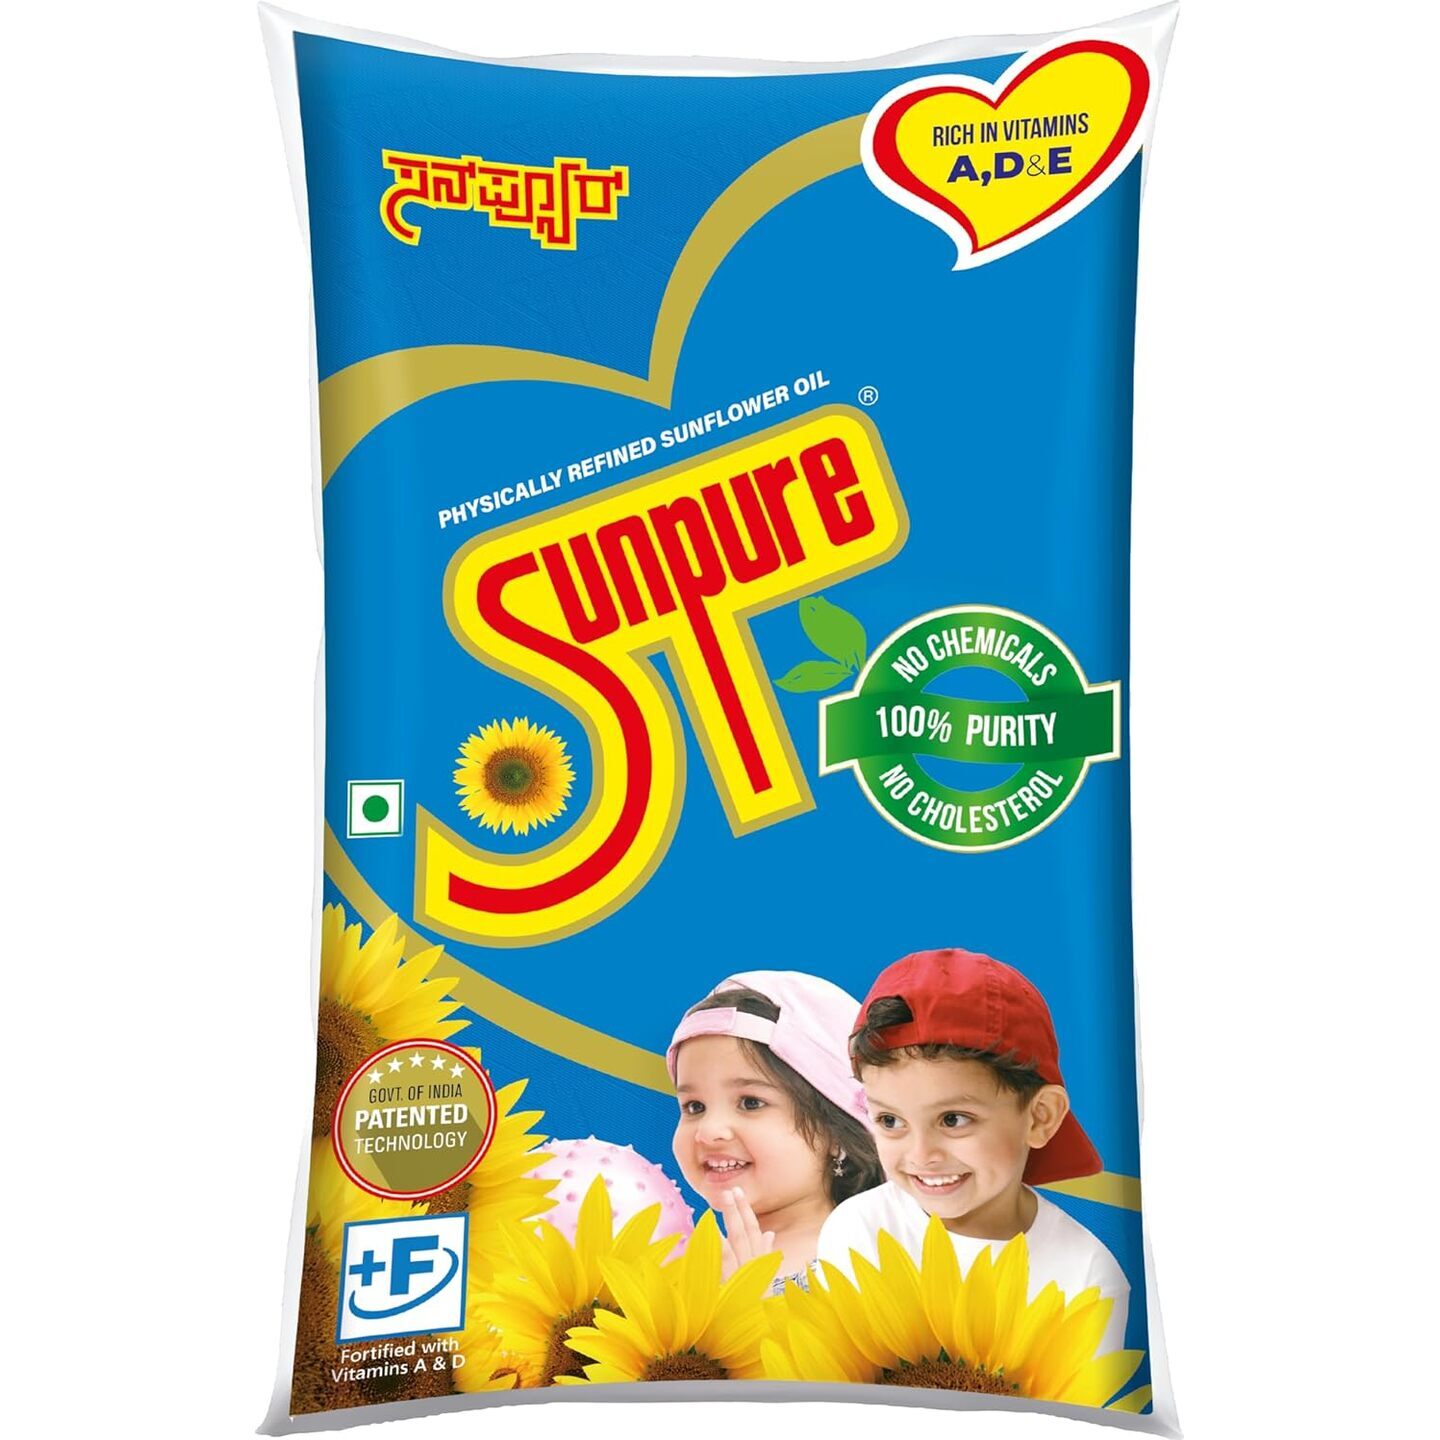 Sunpure Physically Refined Sunflower Oil 1 Litre  Healthiest Cooking Oil  Edible Cooking Oil